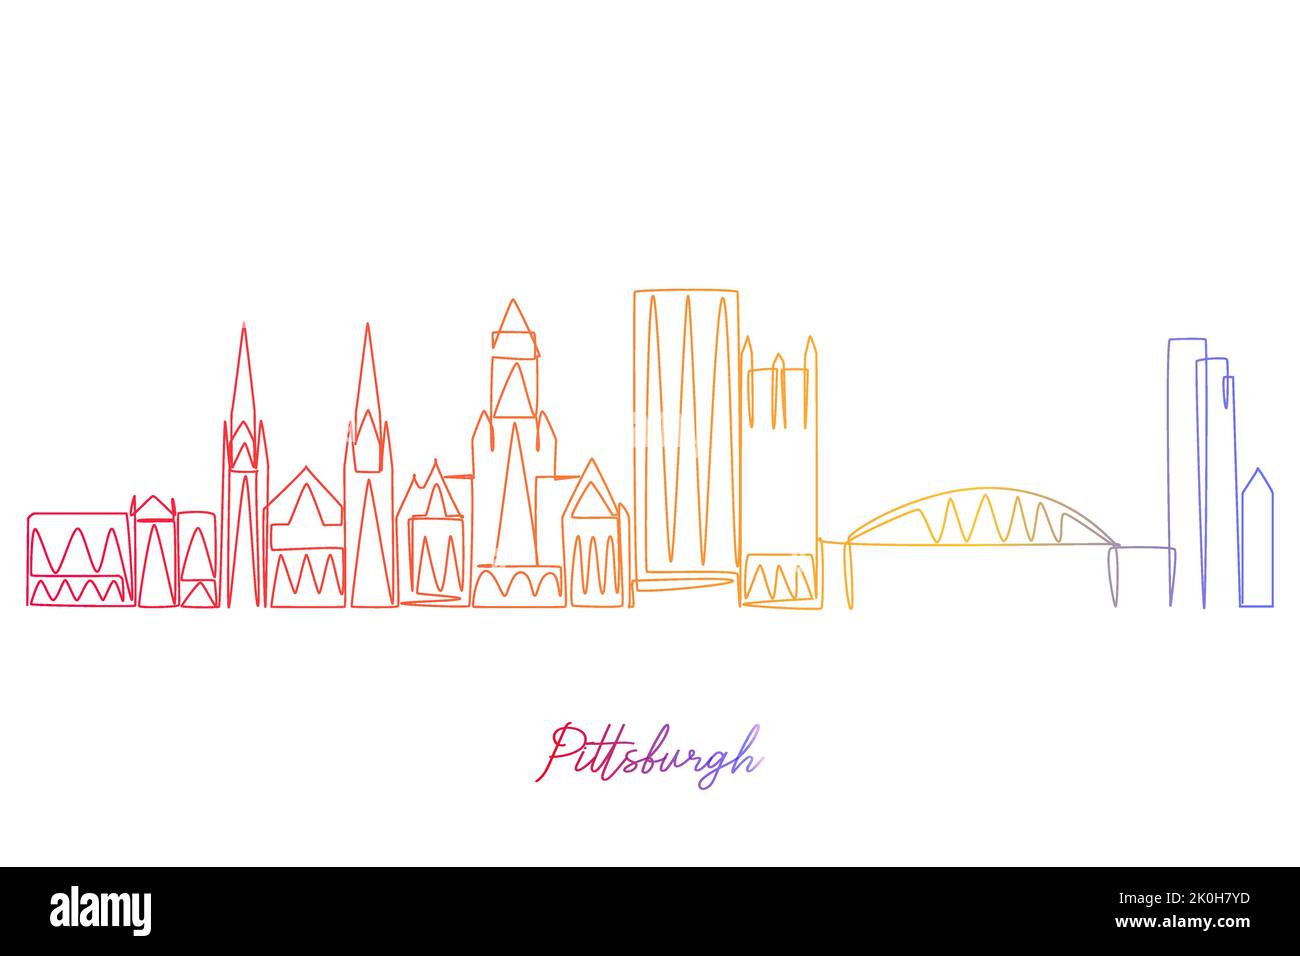 Continuous Single Line drawing of Pittsburg Pennsylvania USA. Simple gradient colored line hand drawn style design for travel and destination concept Stock Vector